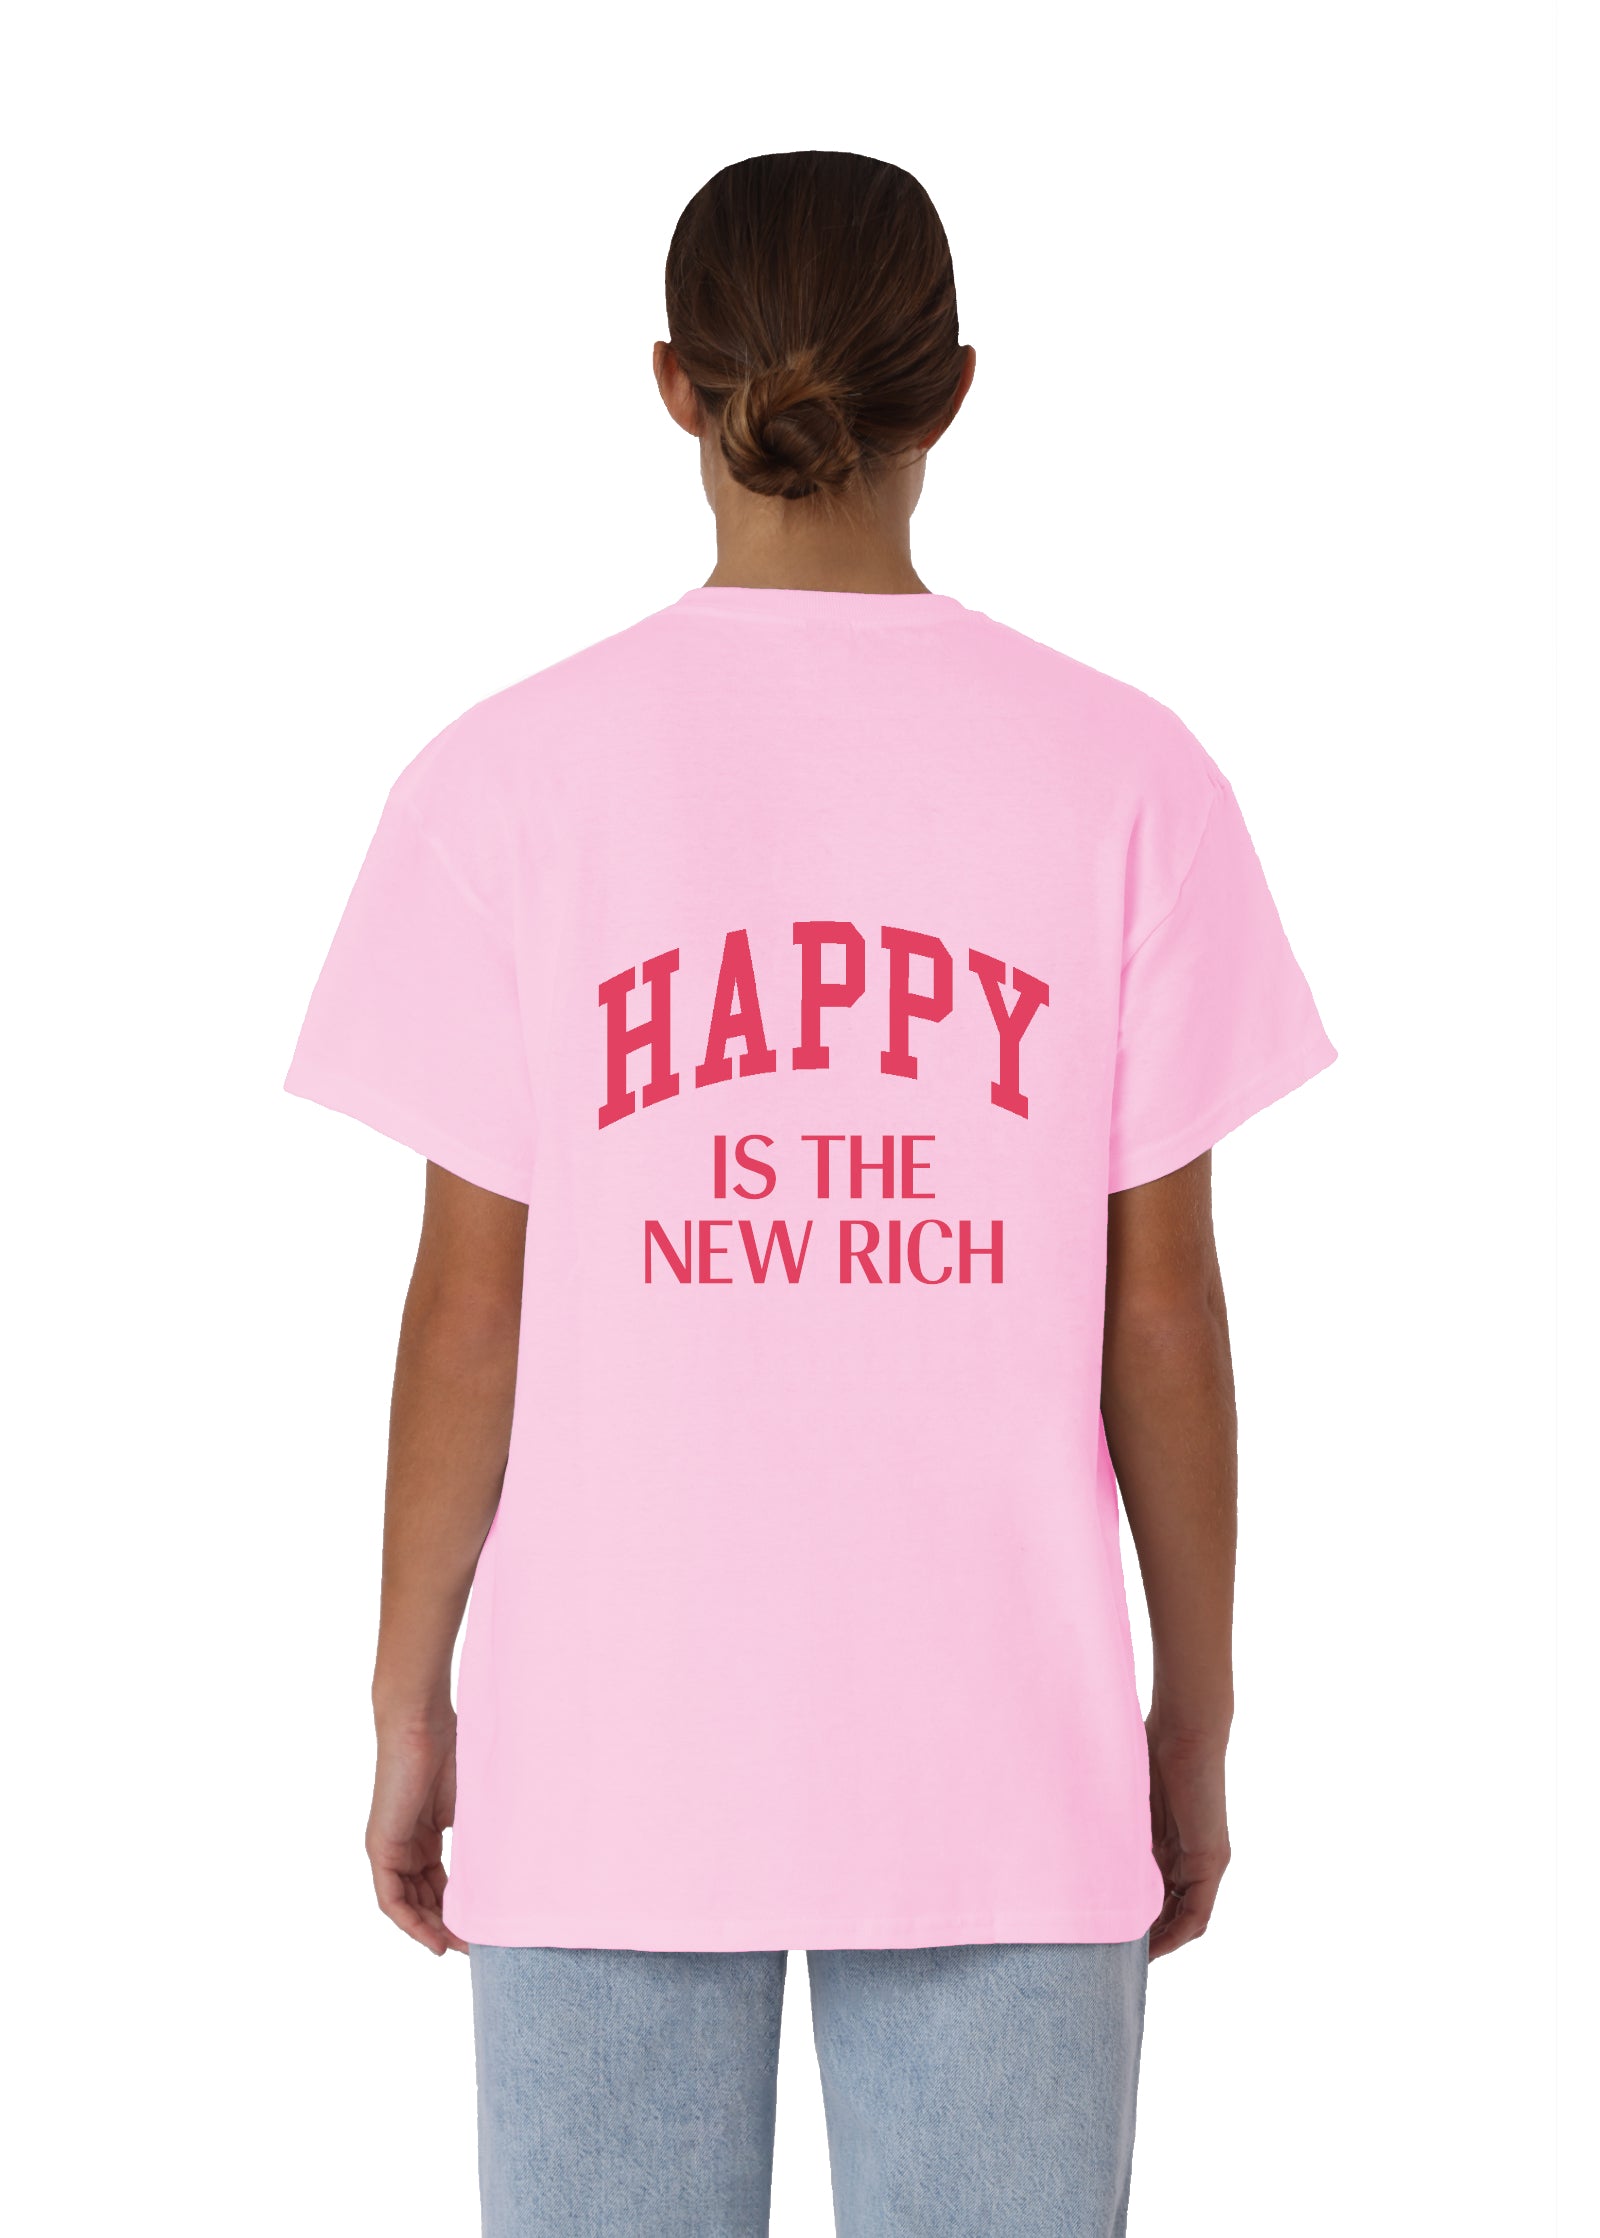 HAPPY IS THE NEW RICH